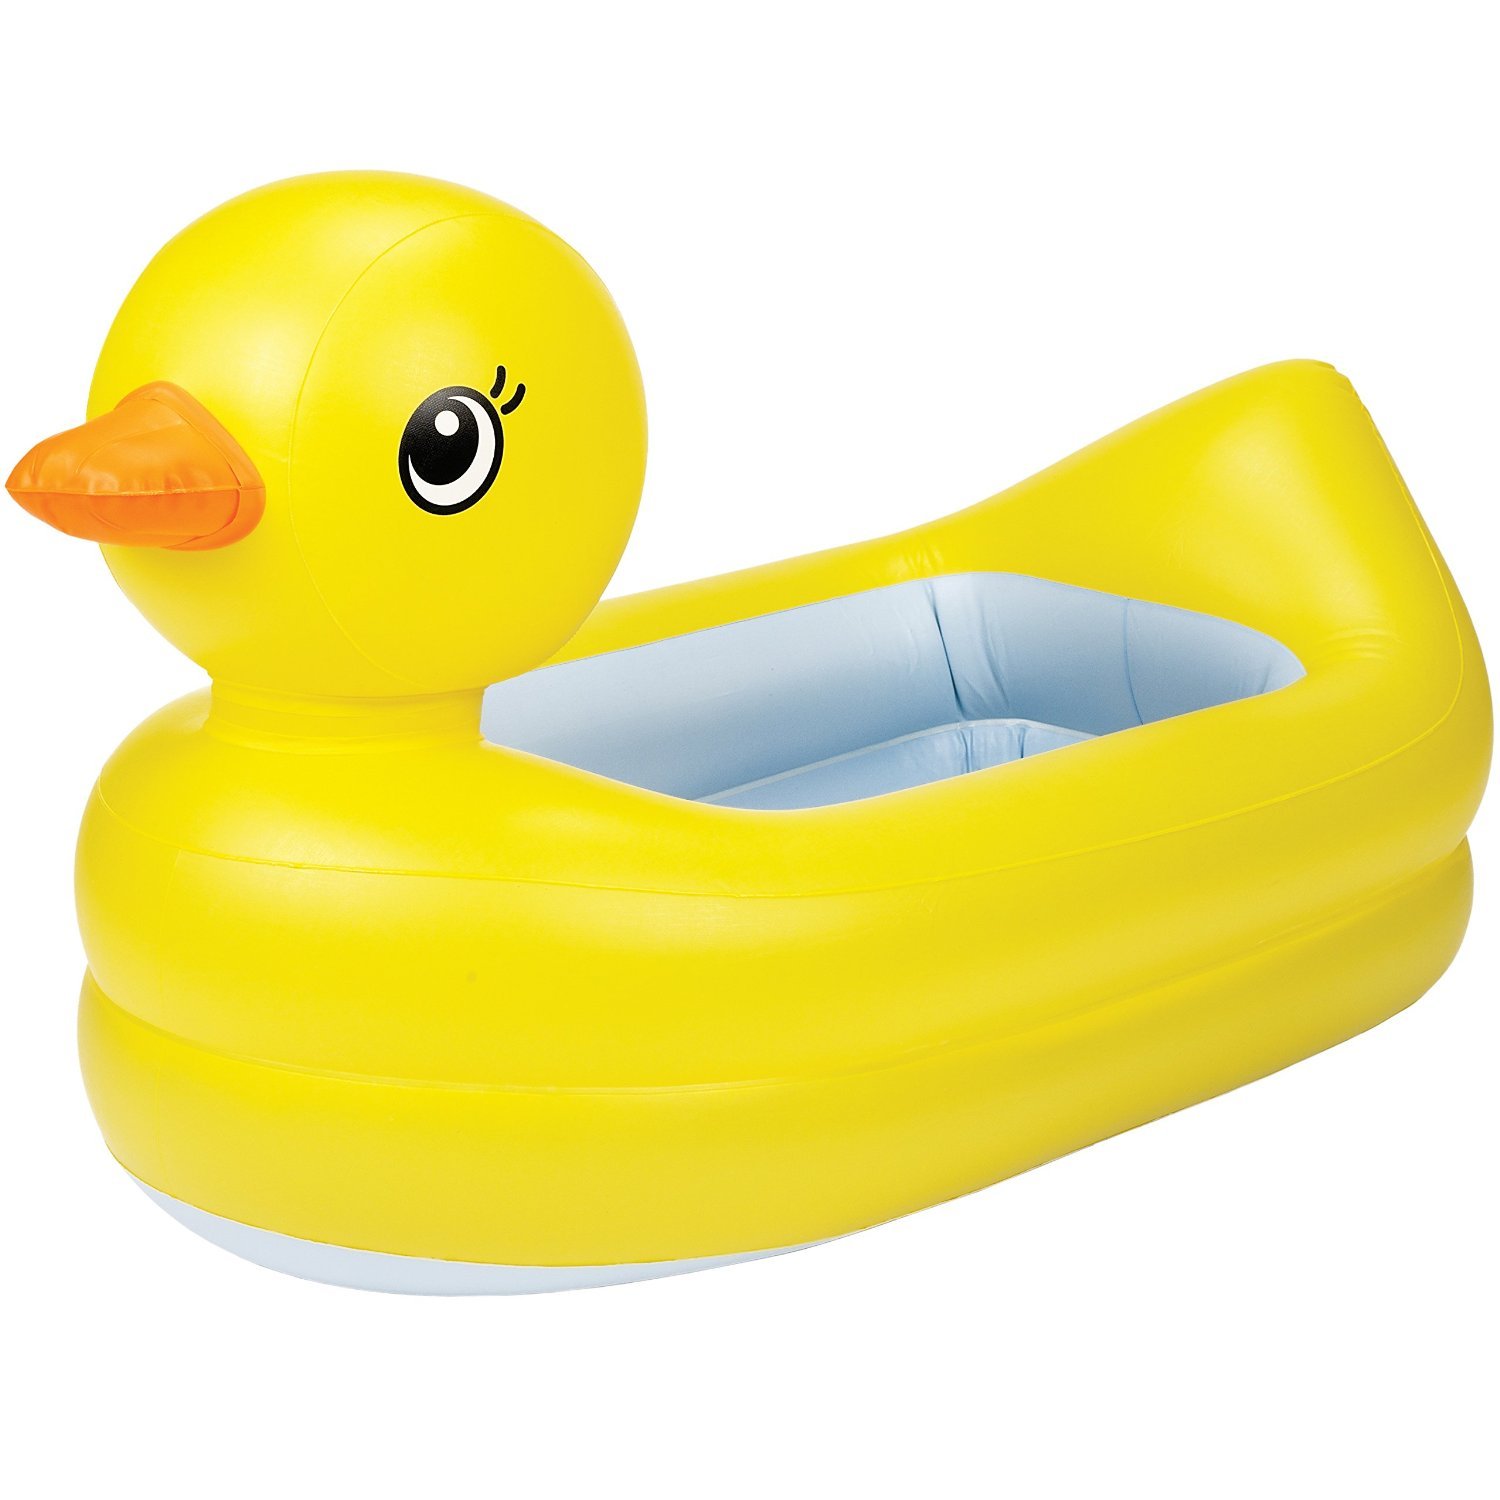 Top 7 Best Infant Tubs For Newborn Reviews in 2022 3